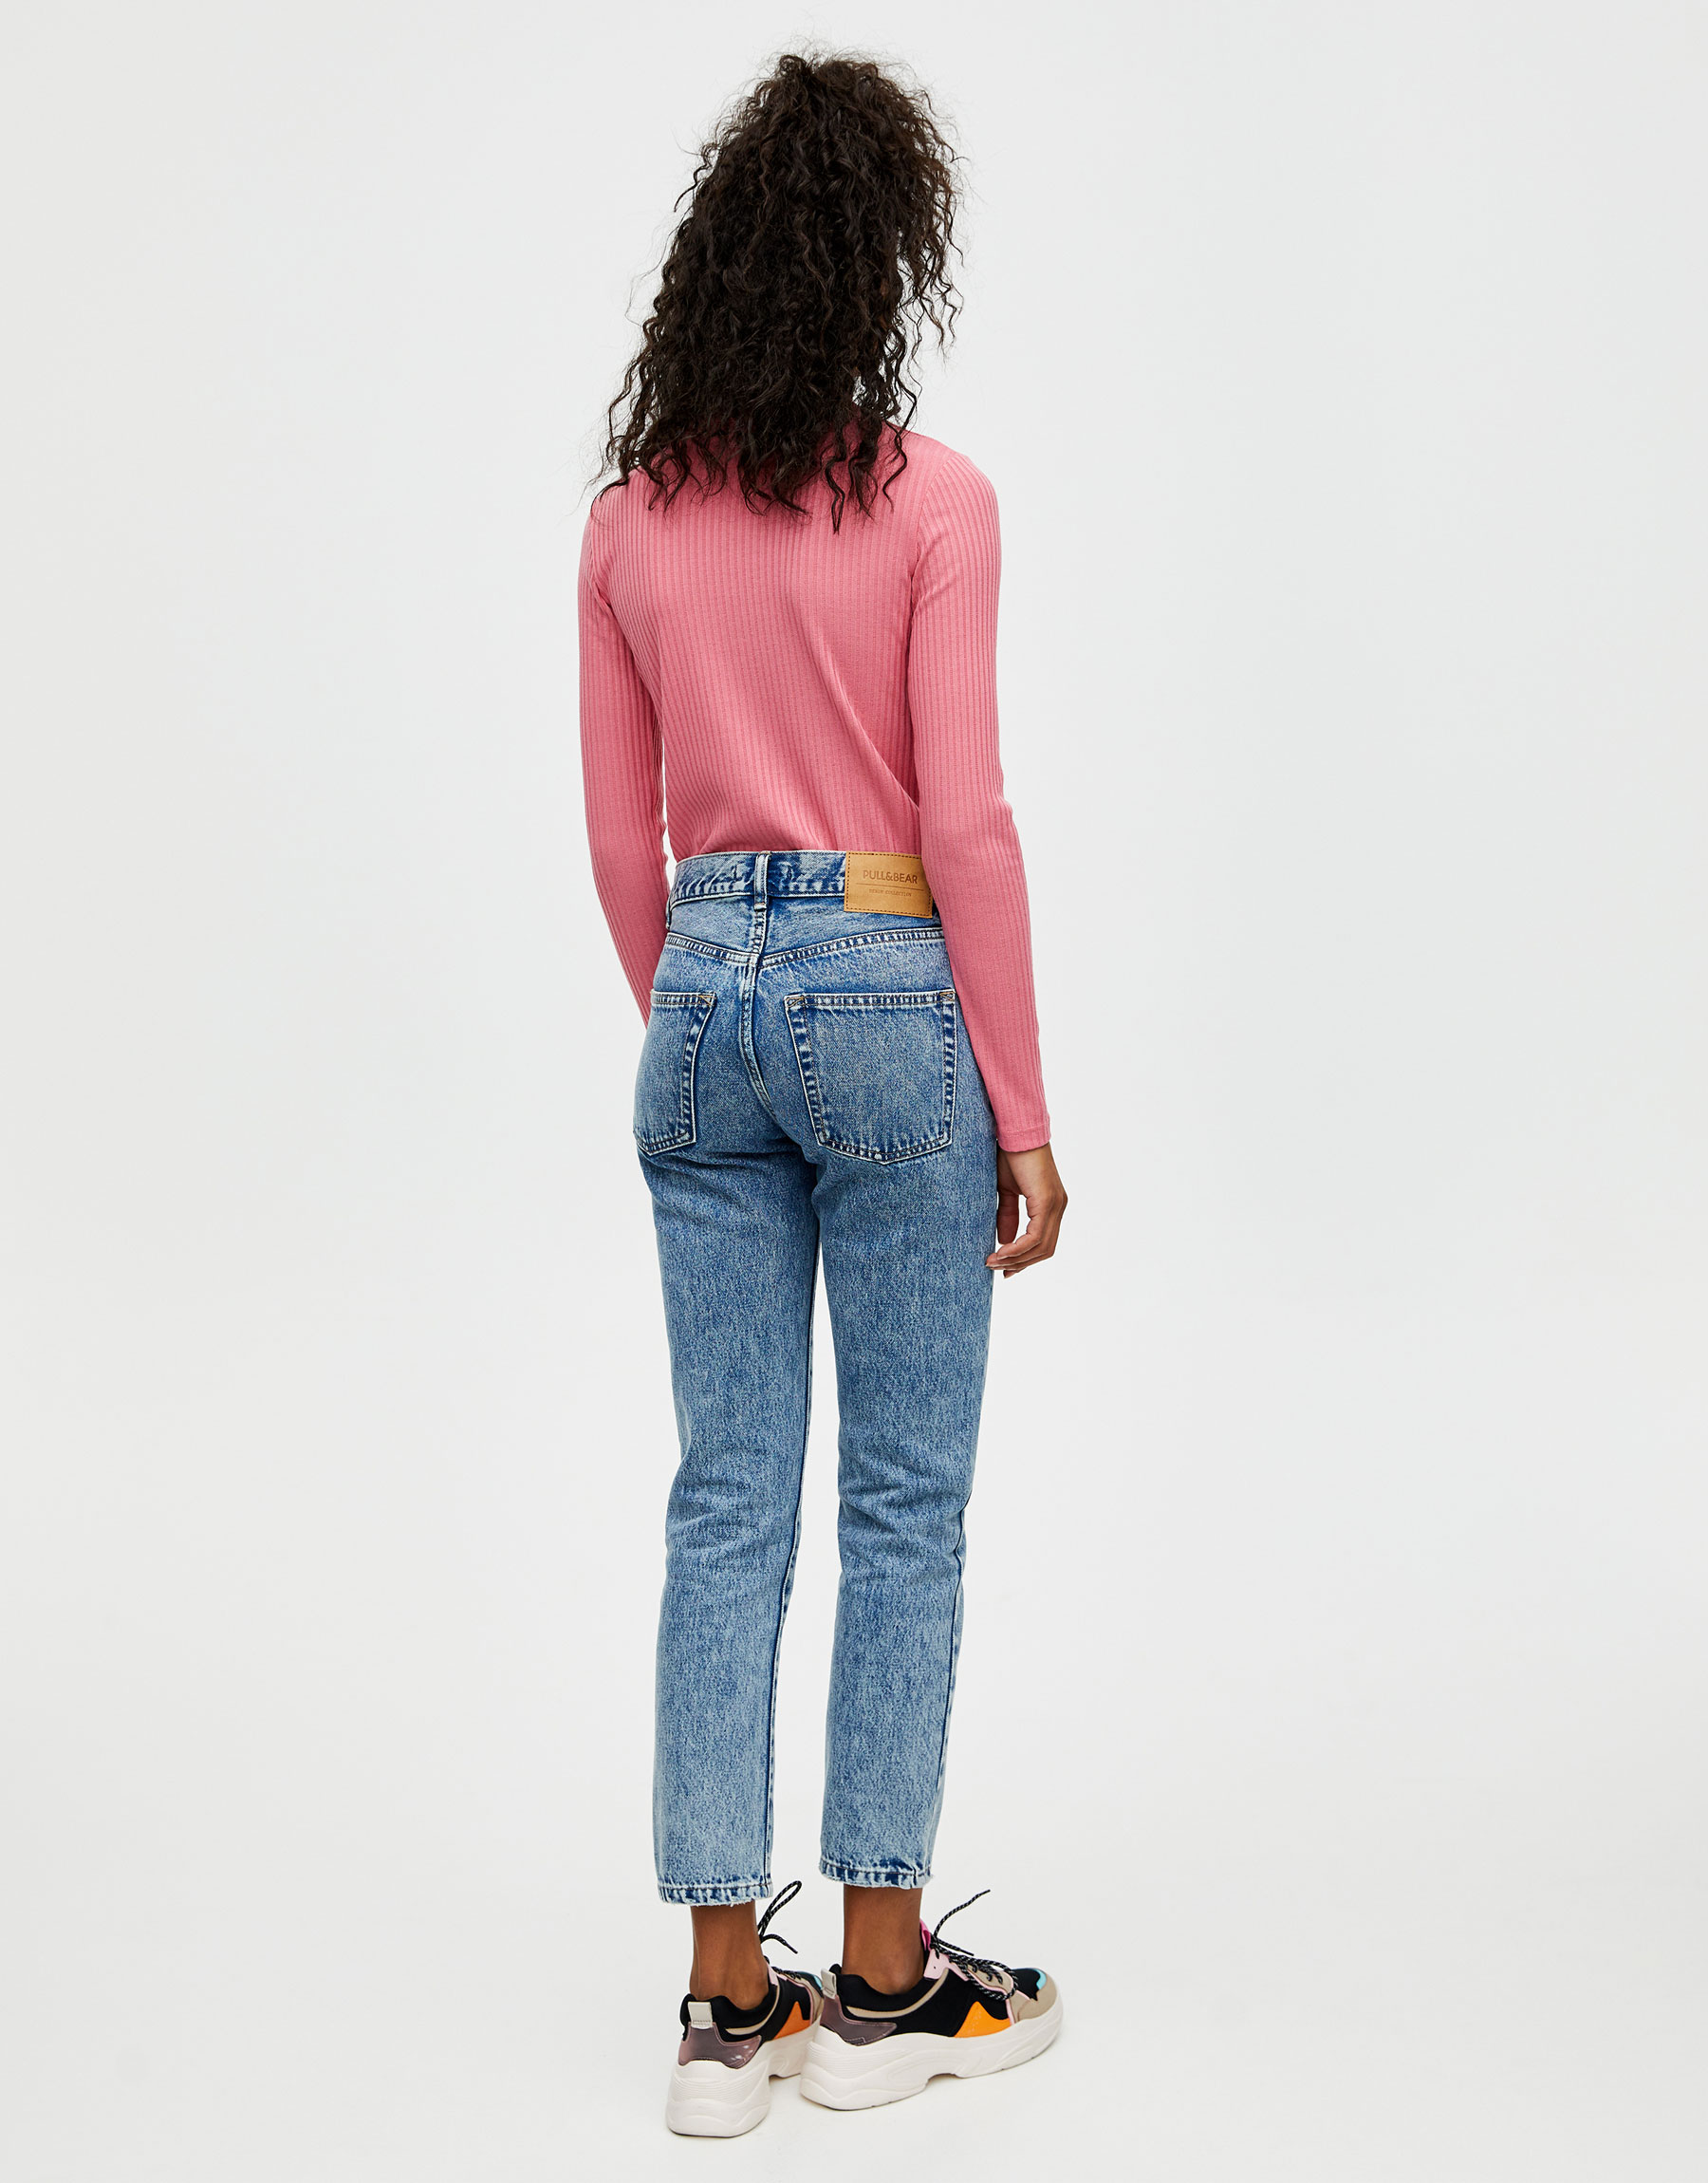 jeans regular pull and bear